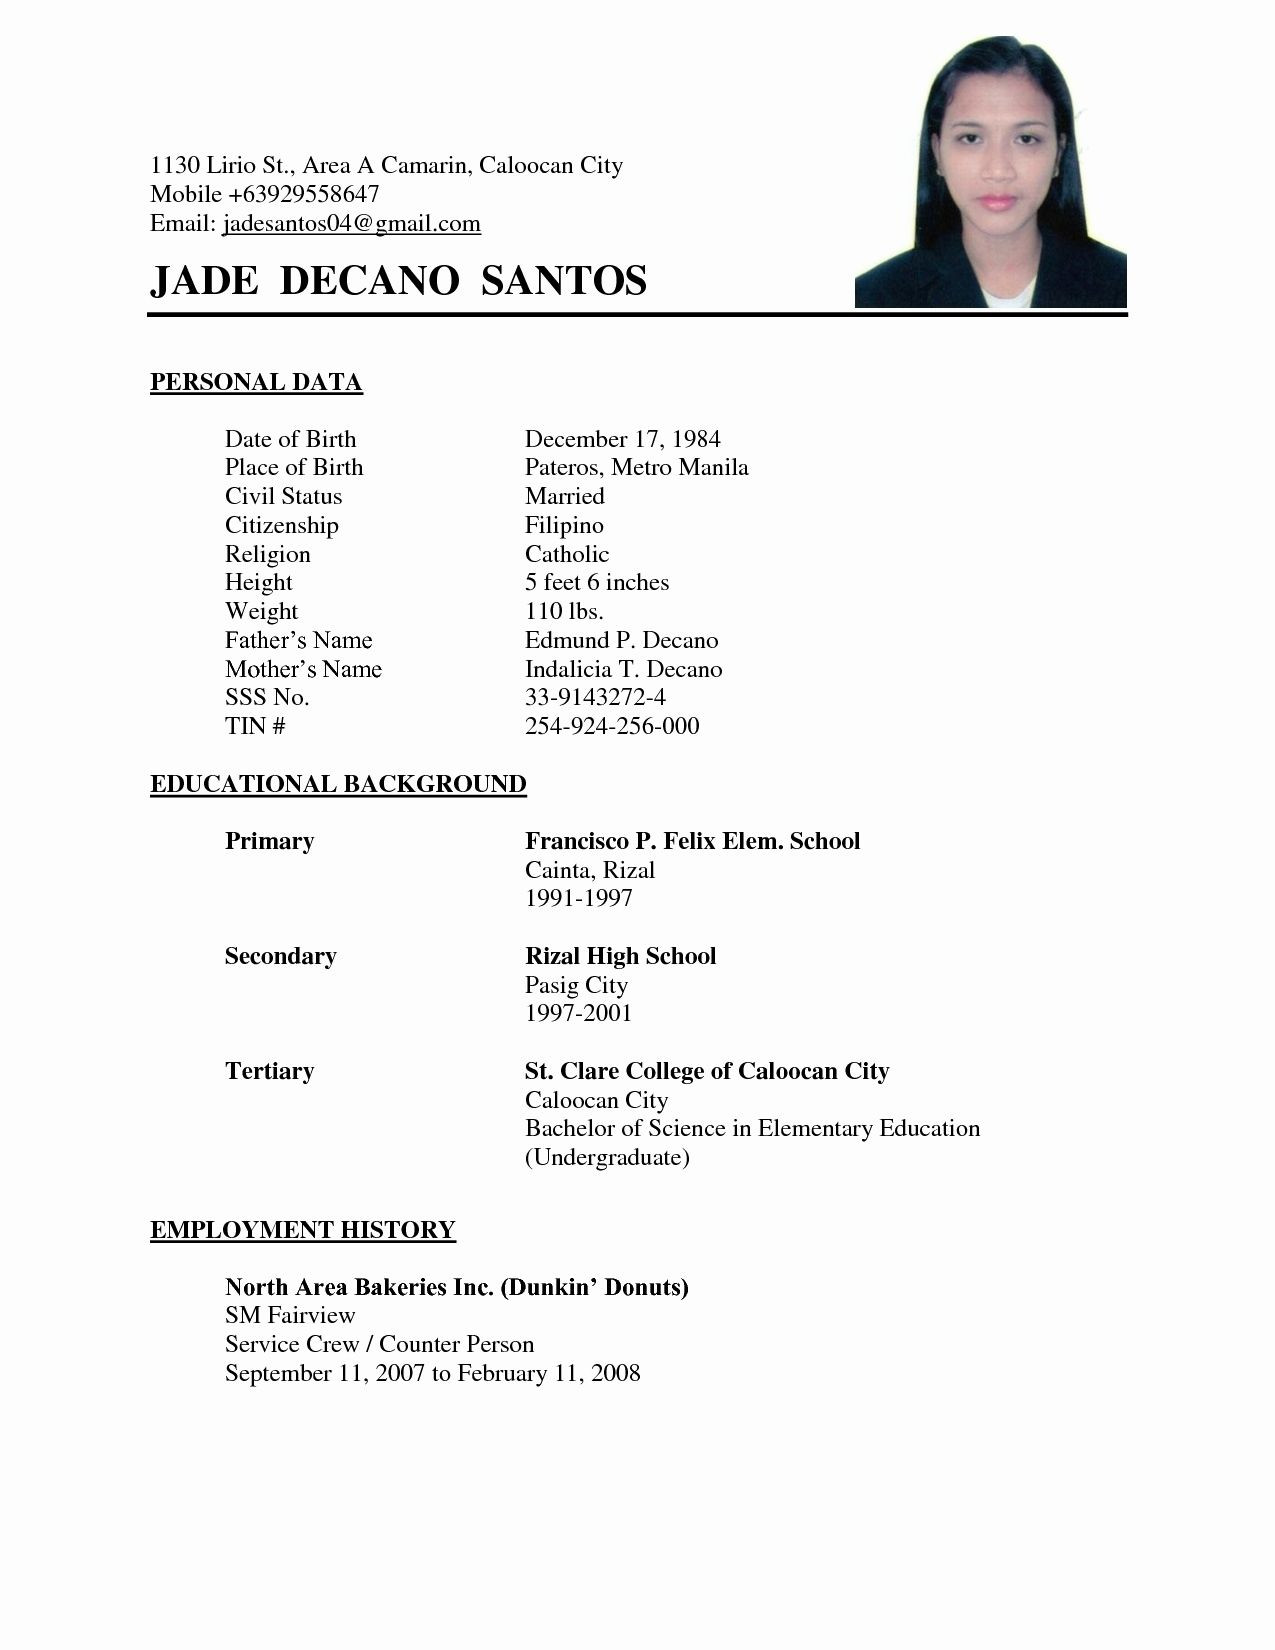 Sample Of A Good Simple Resume Resume format Sample , #format #resume #resumeformat #sample …